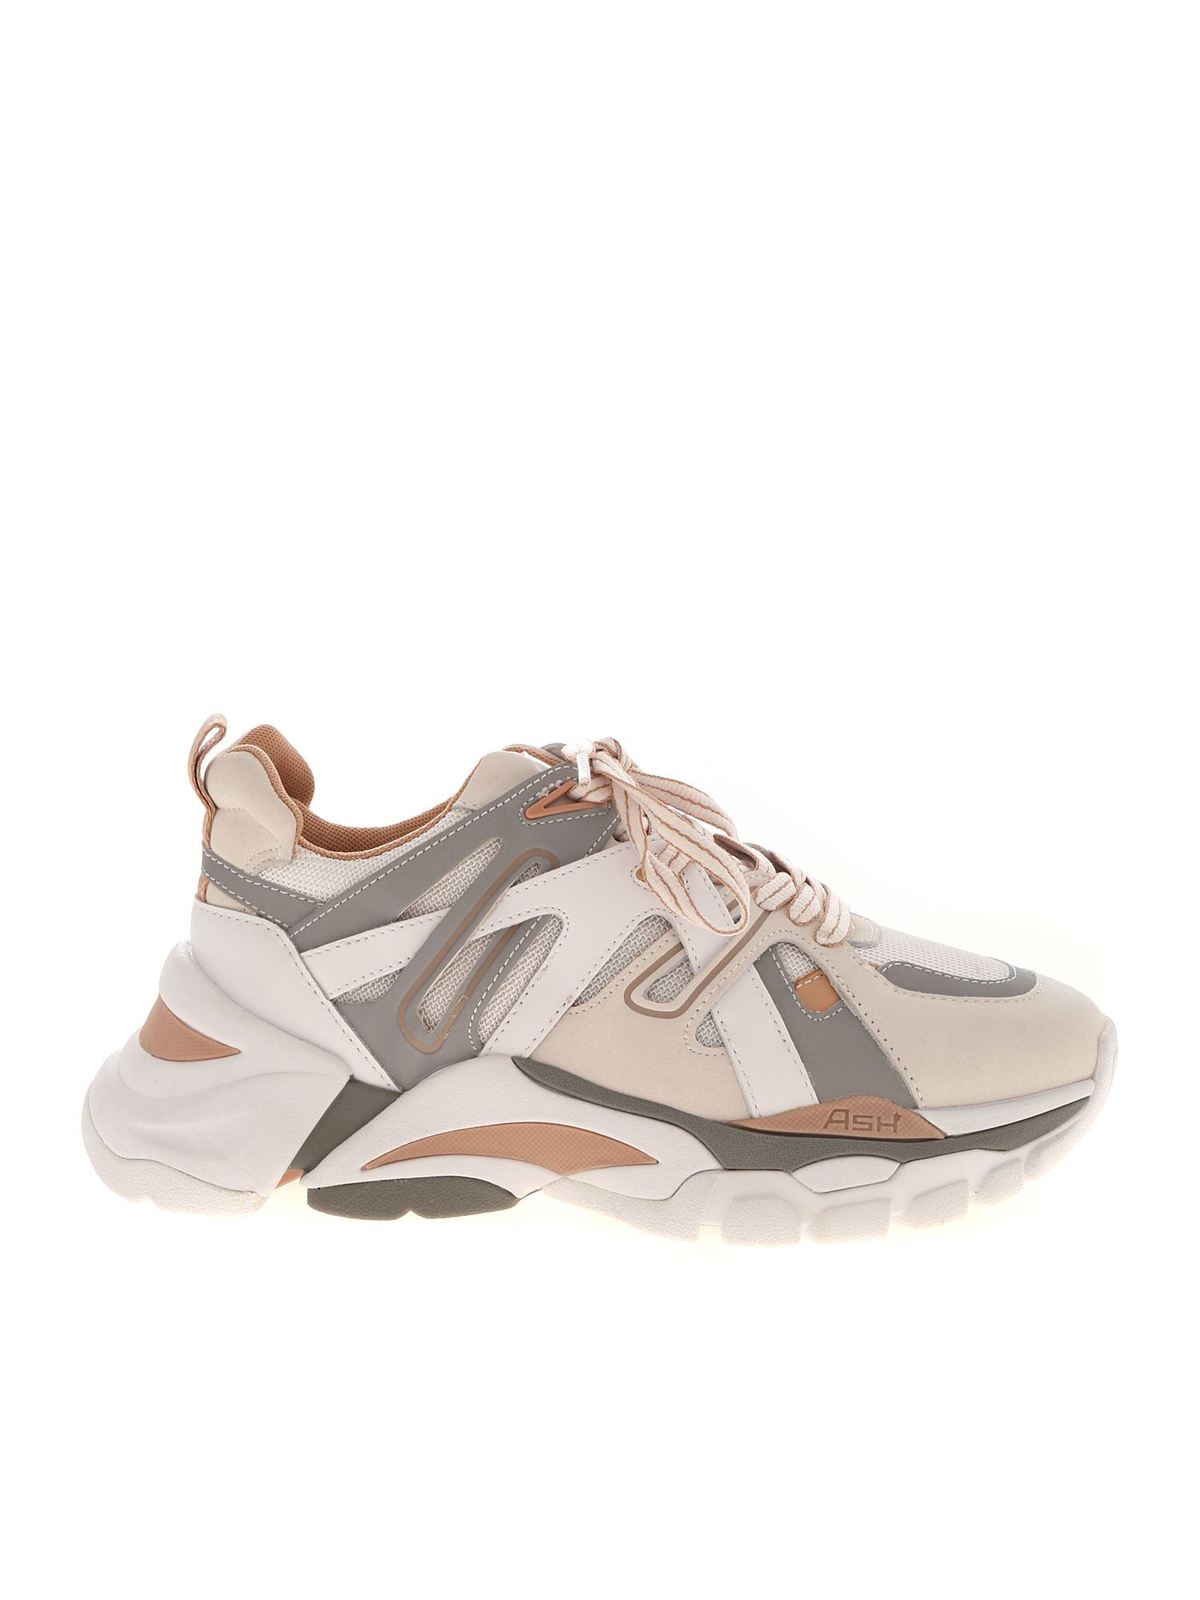 ASH FLASH LEATHER SNEAKERS IN BEIGE AND GREY